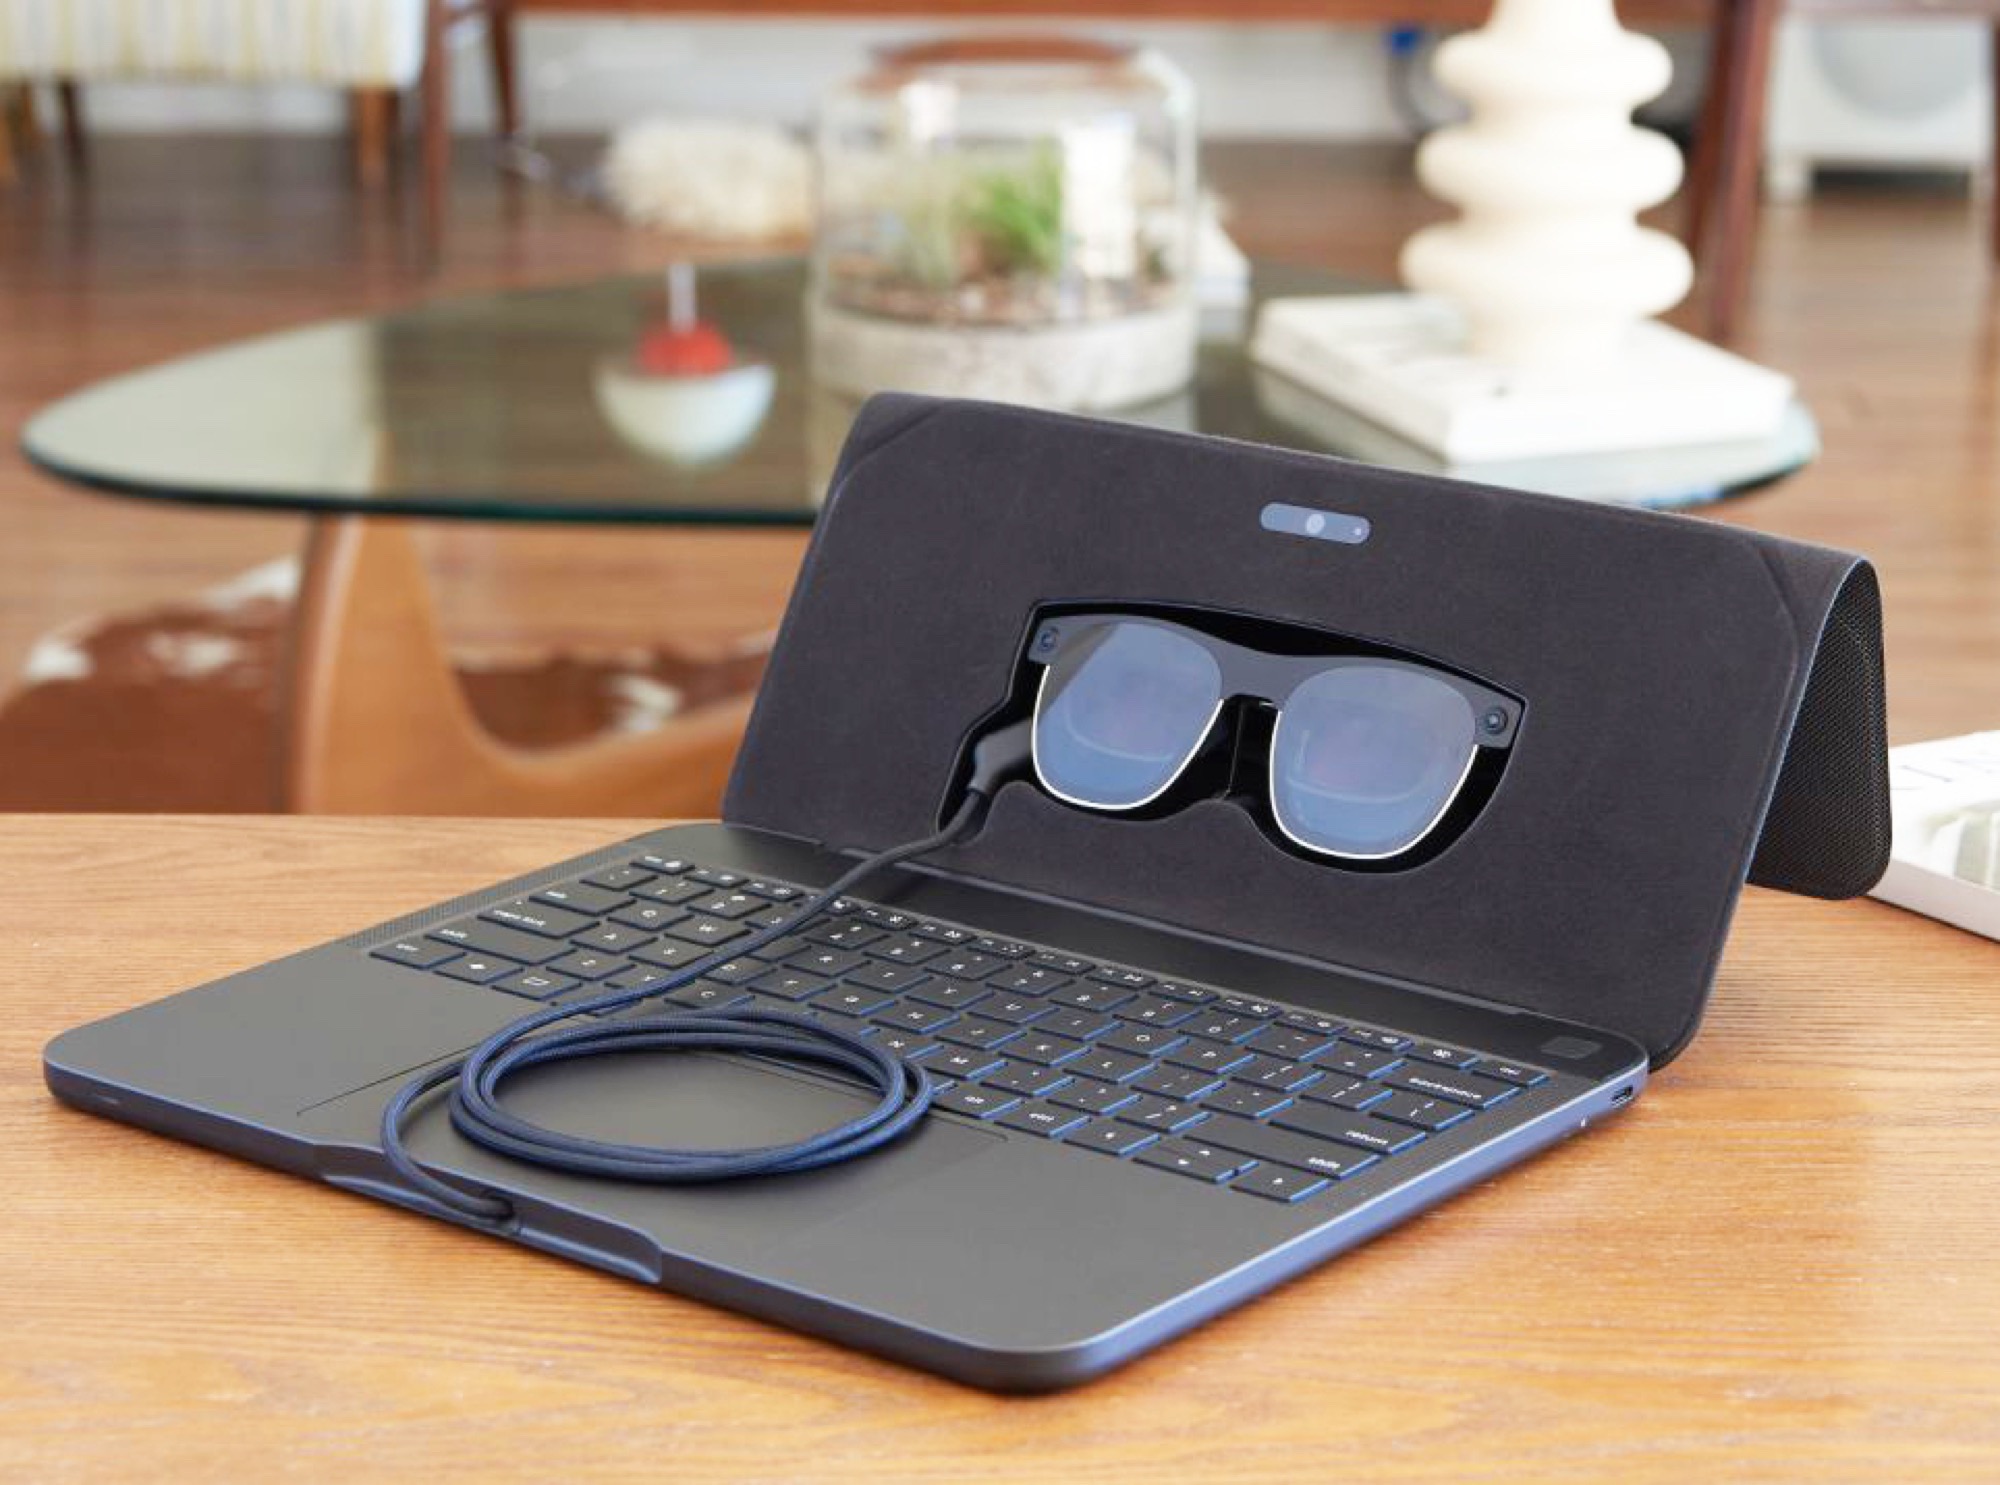 Spacetop G1: an unusual $1900 laptop that has no display - instead a 100-inch virtual screen